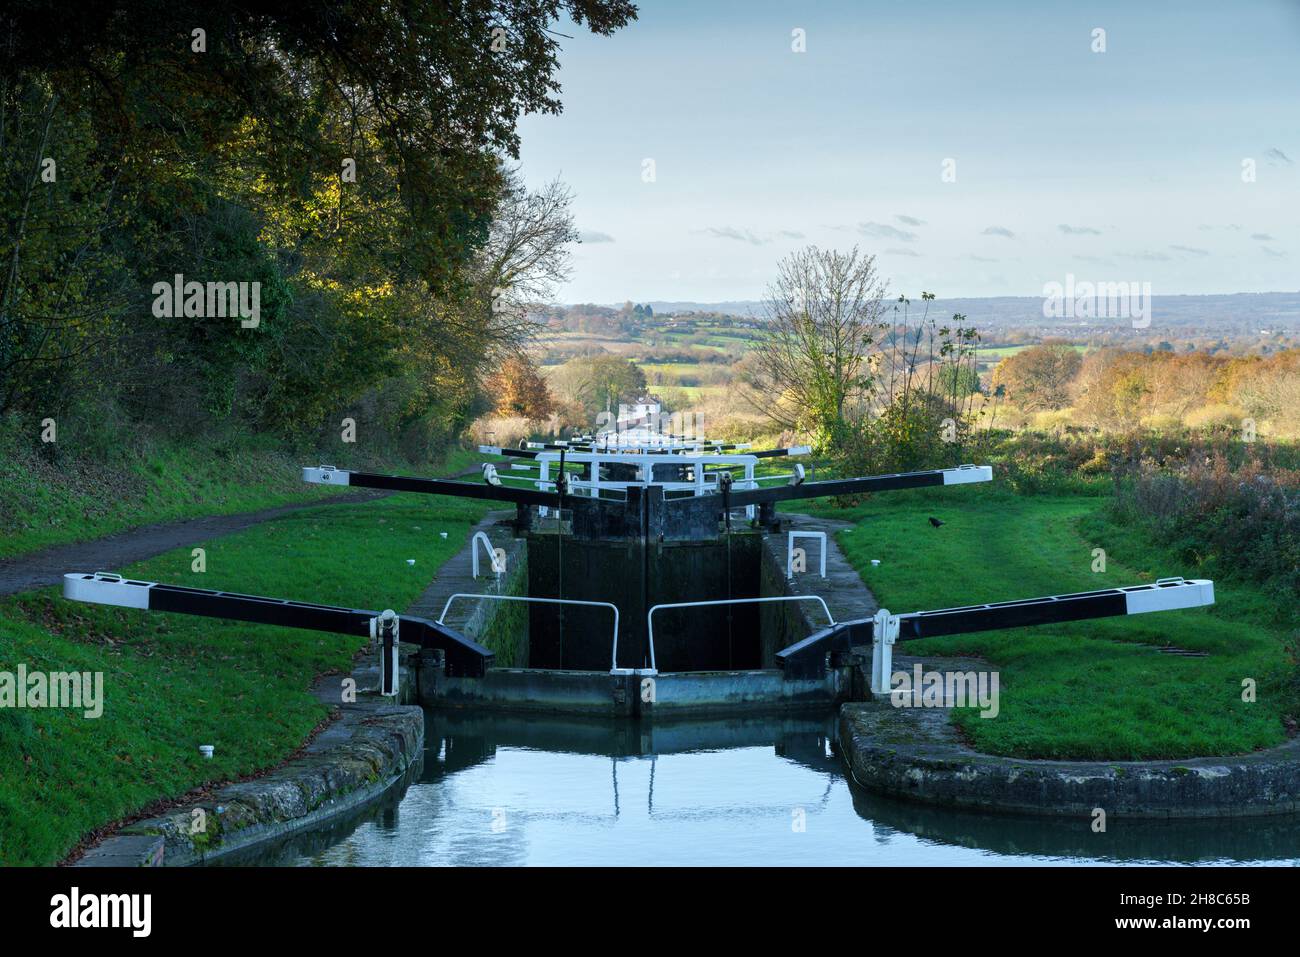 Steep flight of 16 locks at Caen Hill, Kennet and Avon Canal, Devizes, Wiltshire, England UK Stock Photo